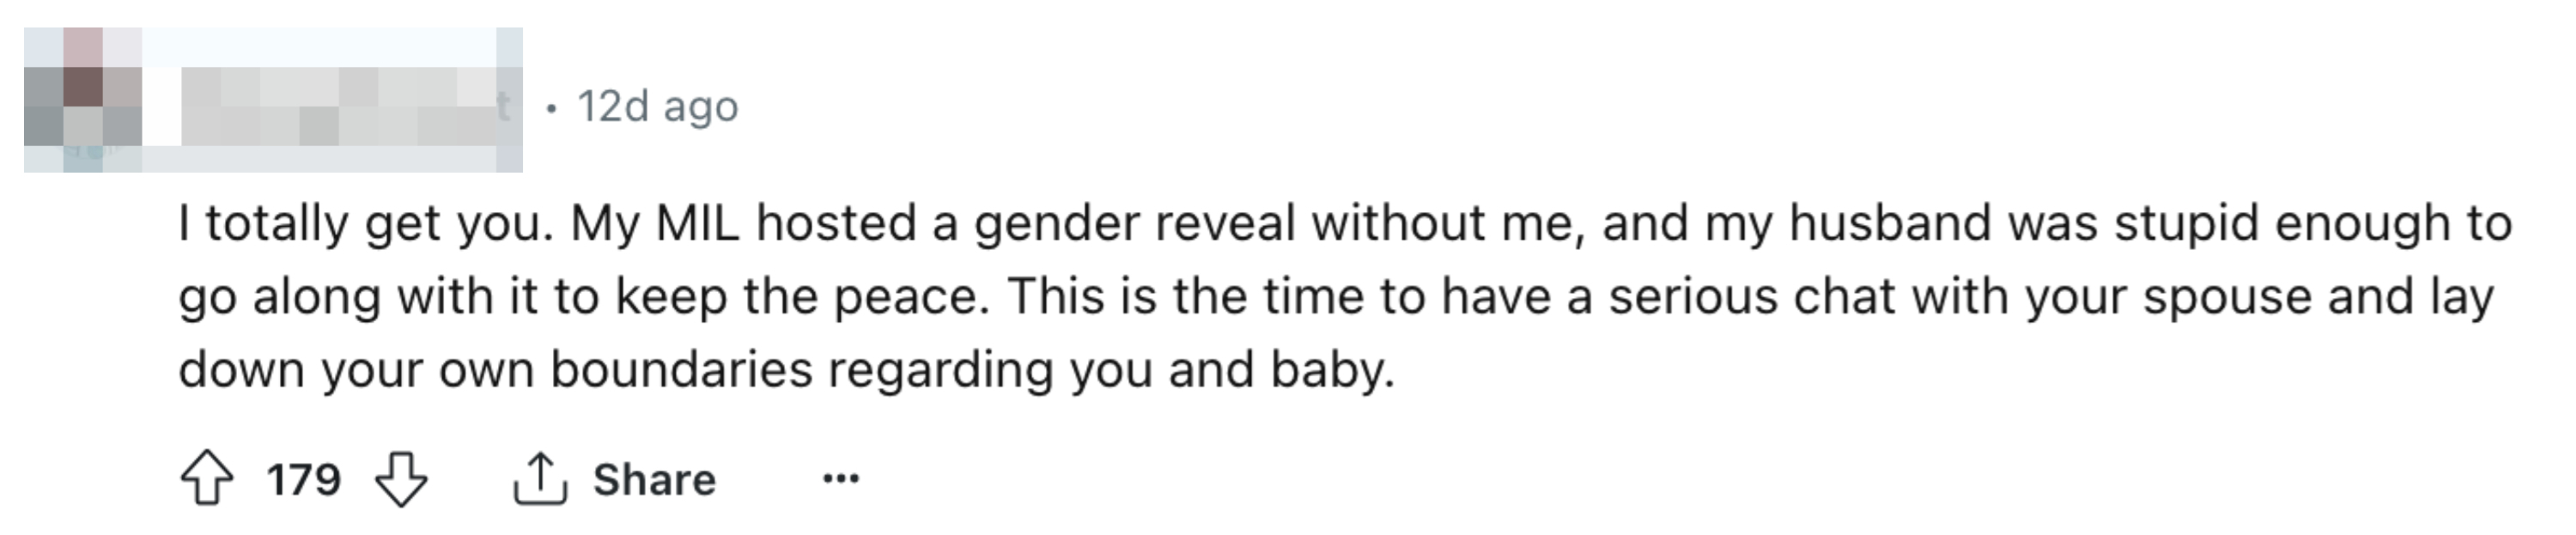 A screenshot of a social media comment discussing the poster&#x27;s frustration about a family member organizing a gender reveal without their consent